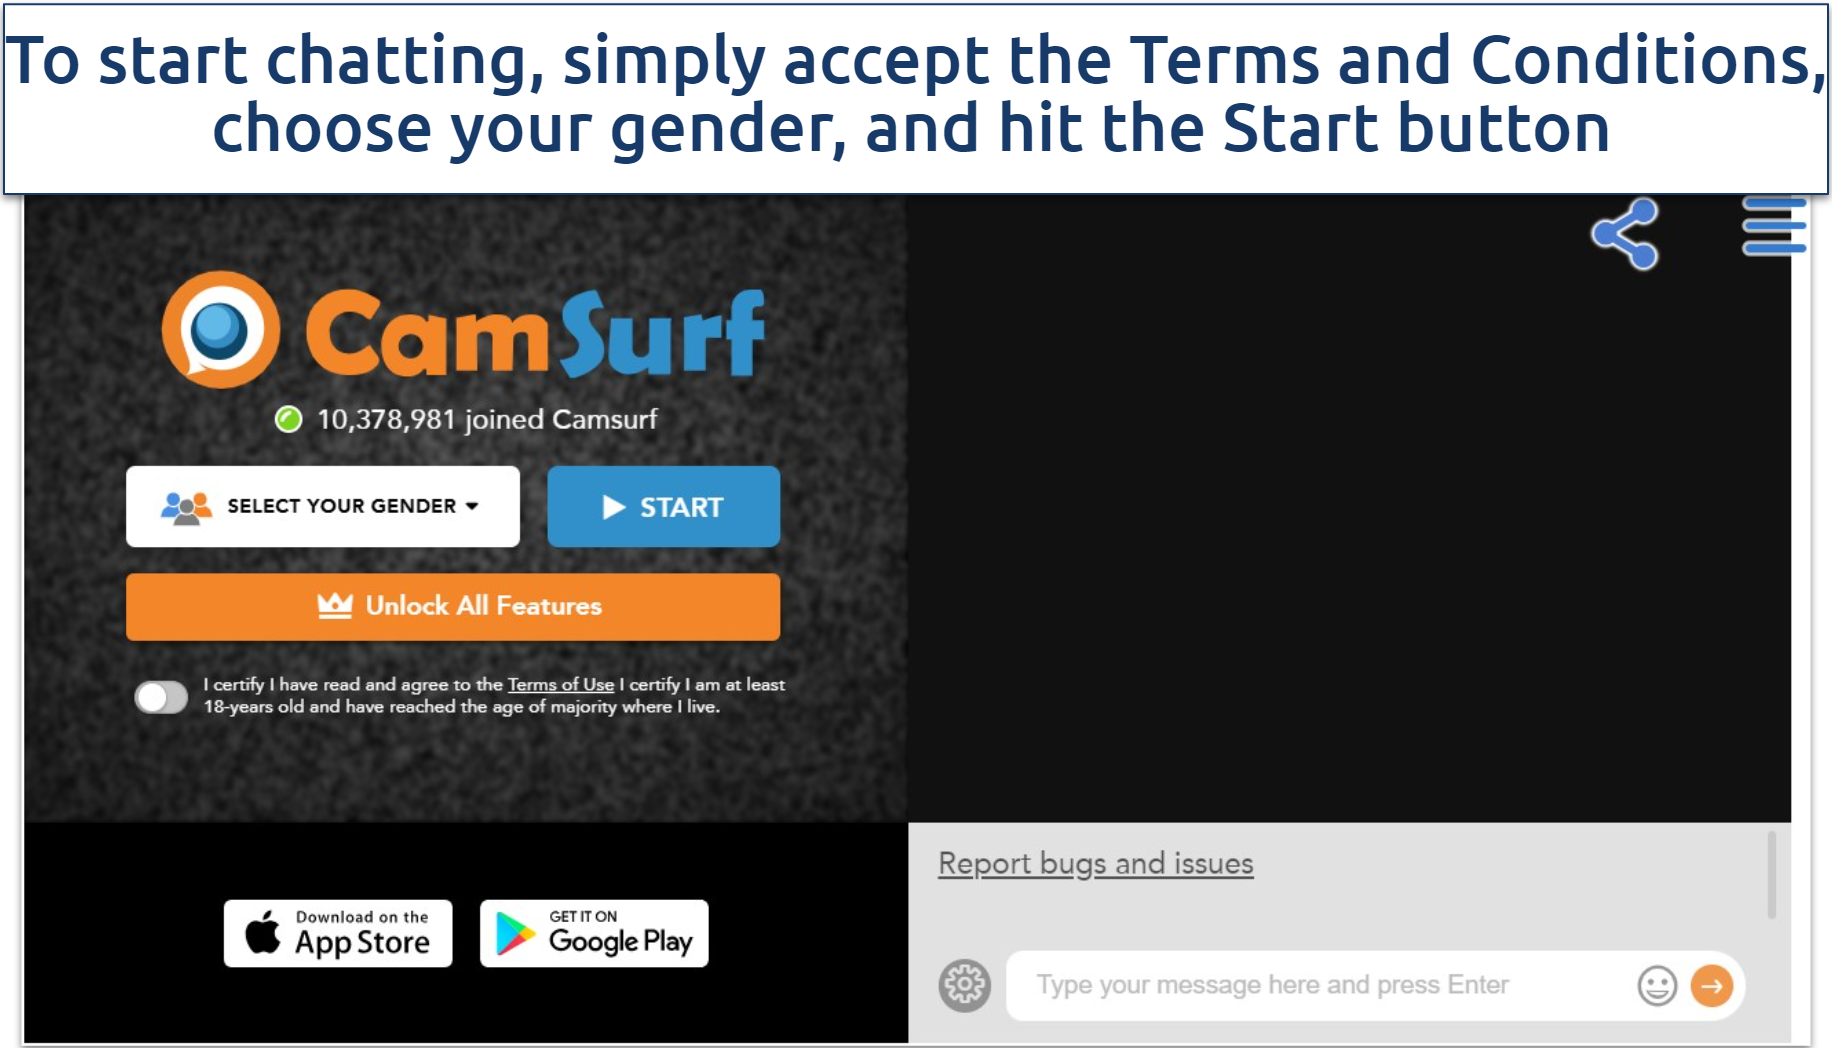 A screenshot of the Camsurf homepage